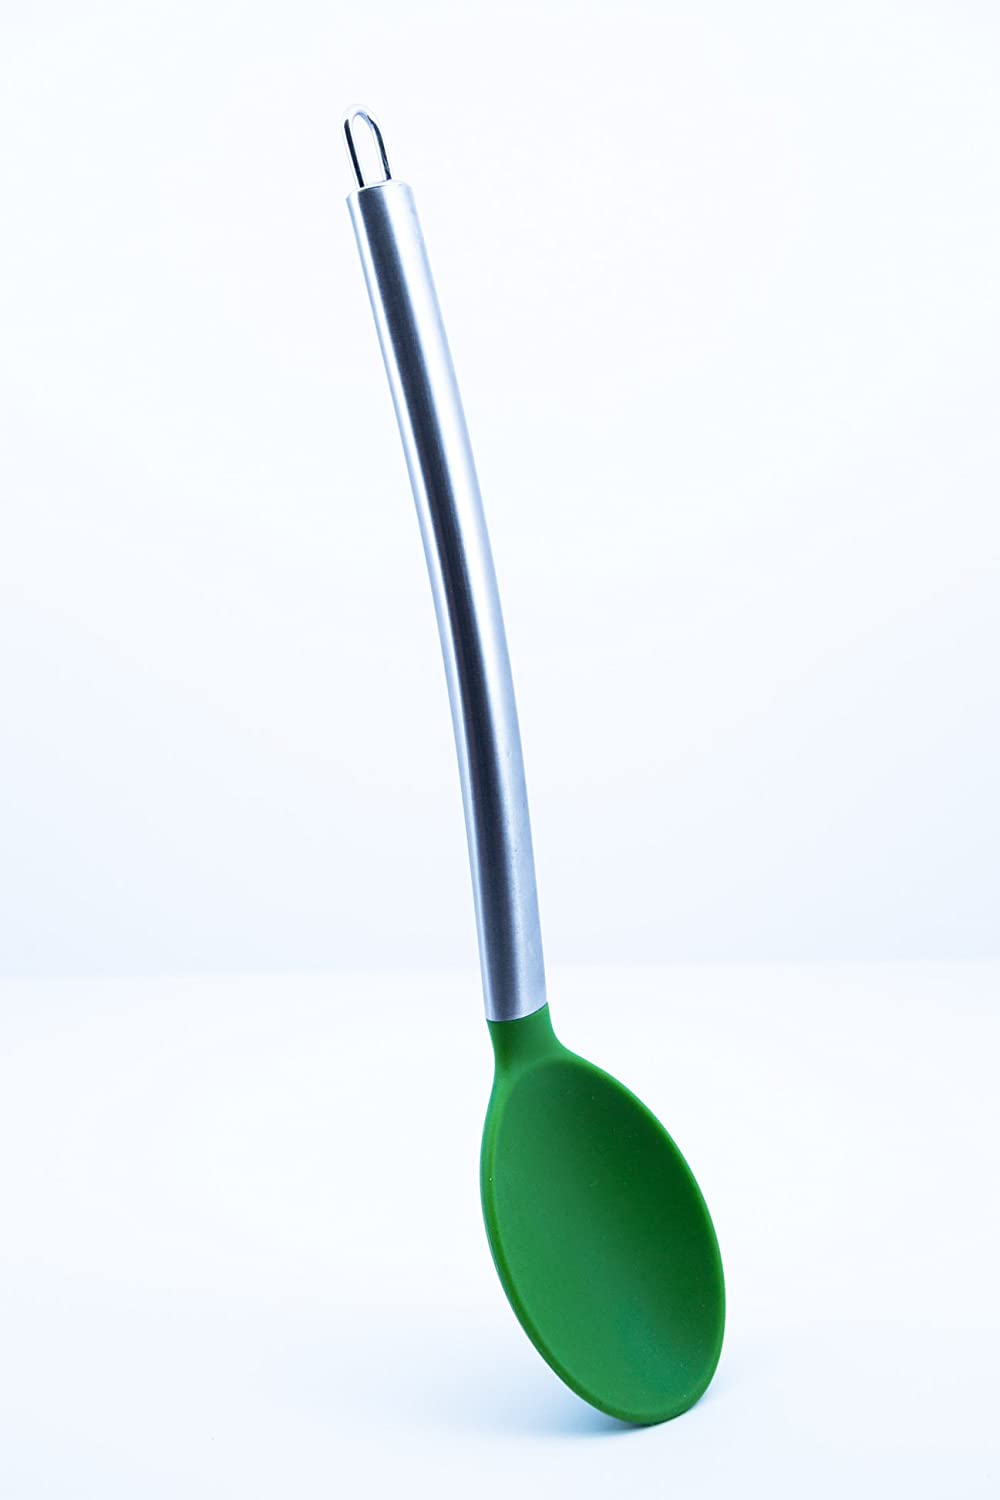 BEST Large Silicone Kitchen Mixing Serving Spoon by Chef Frog – For ...